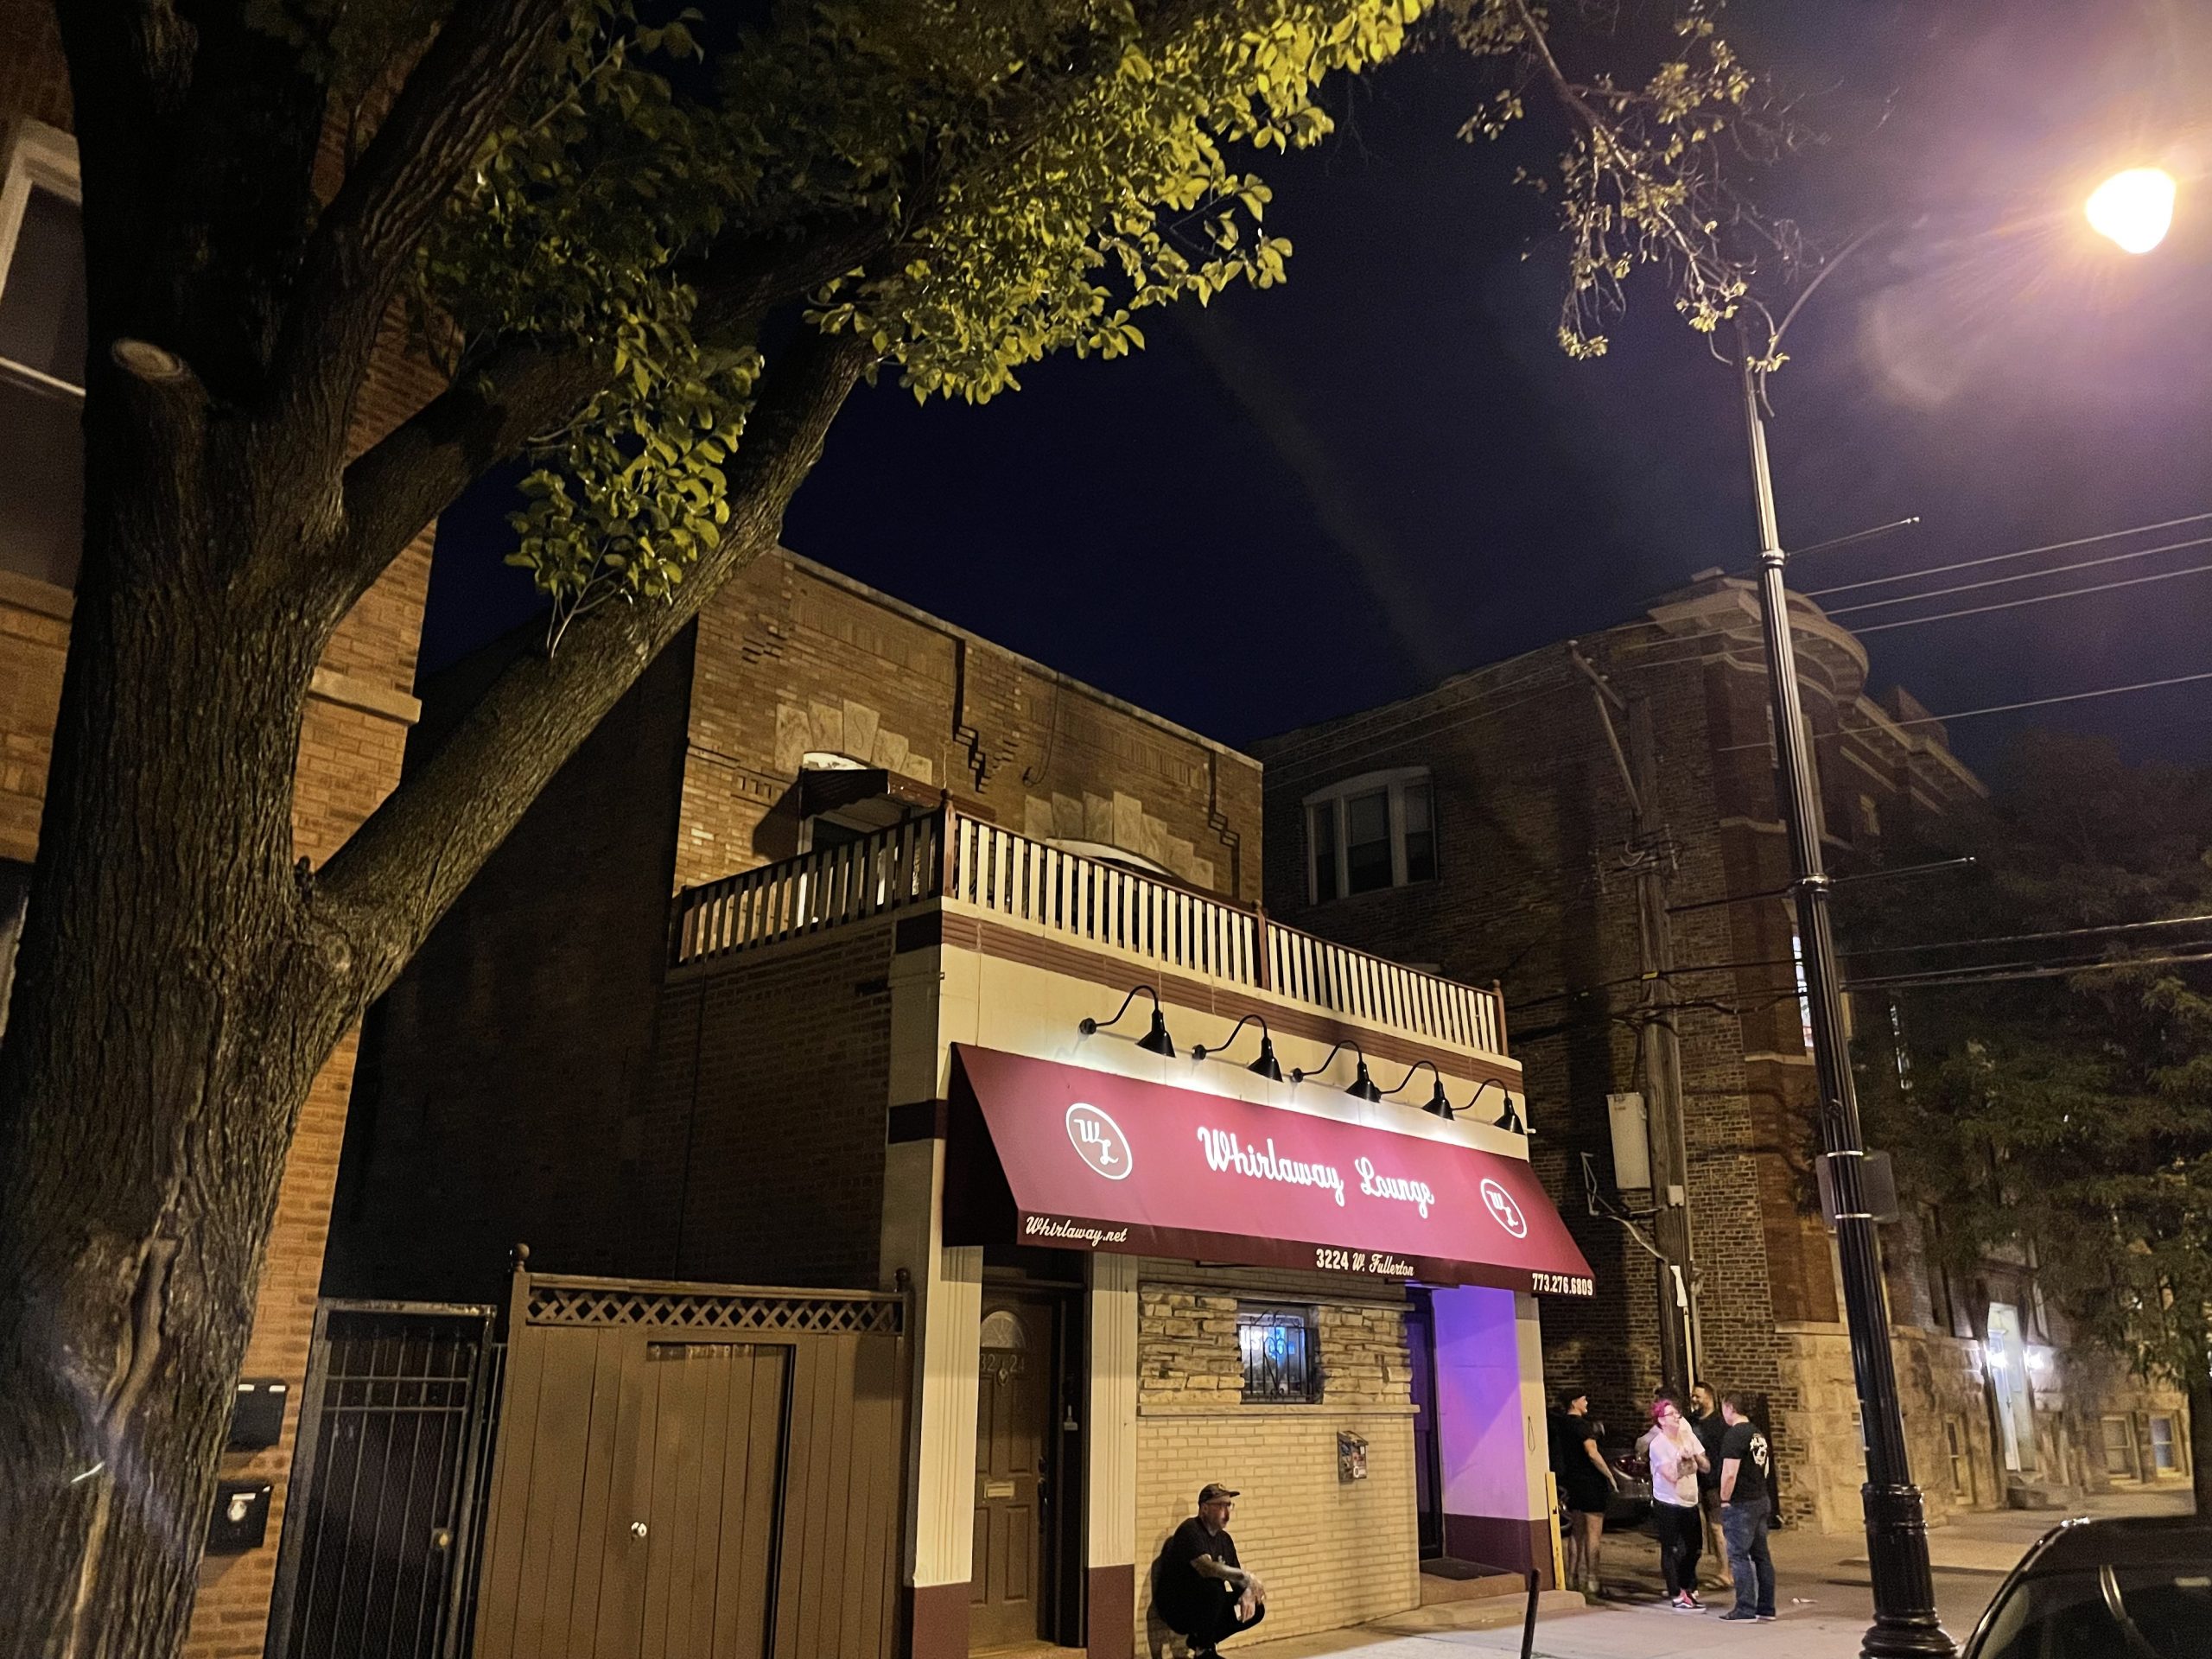 Whirlaway Lounge - Chicago Dive Bar - Exterior Building